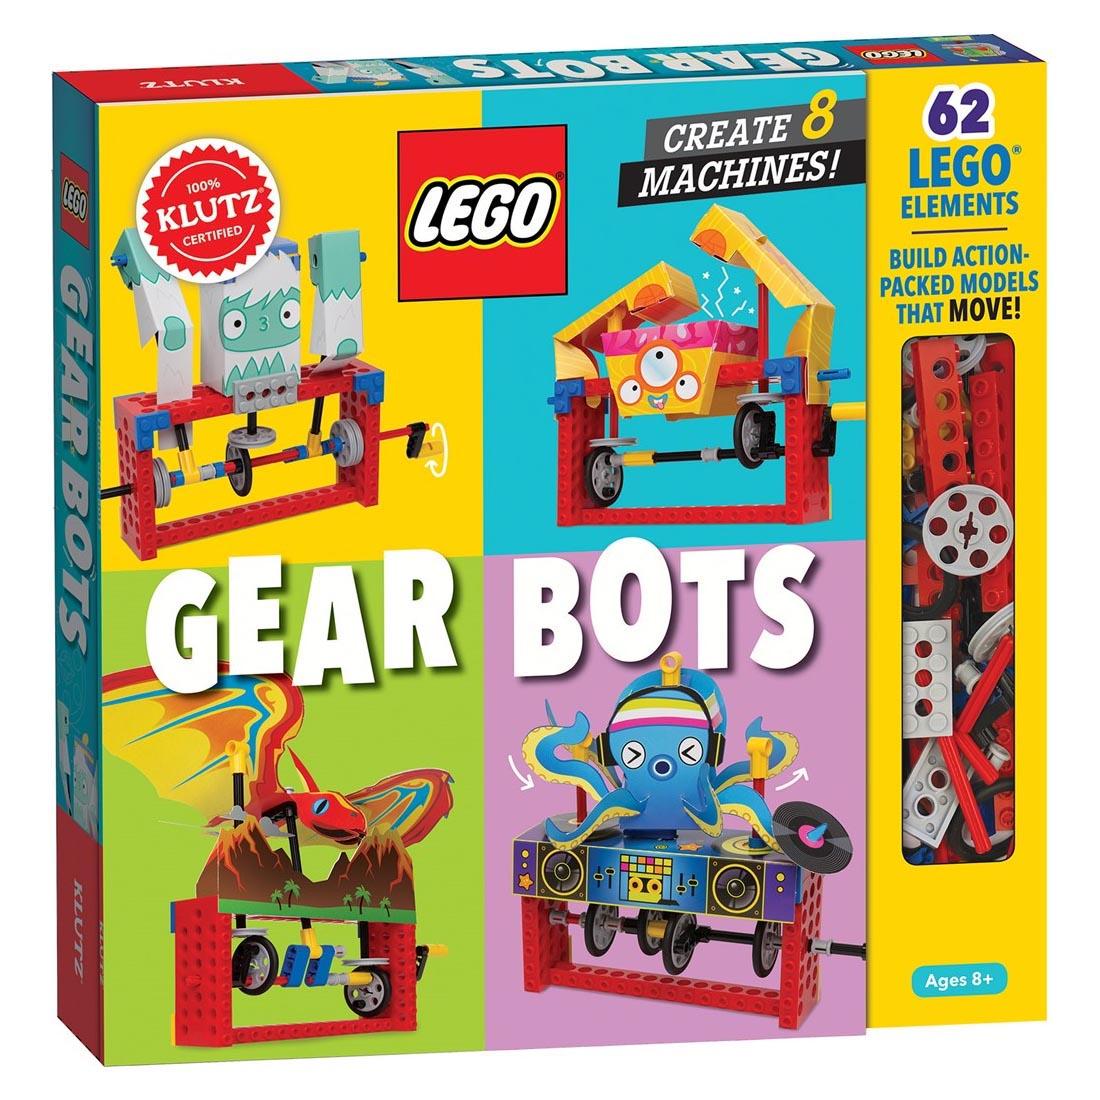 Lego gear bots package shows 4 assembled machines